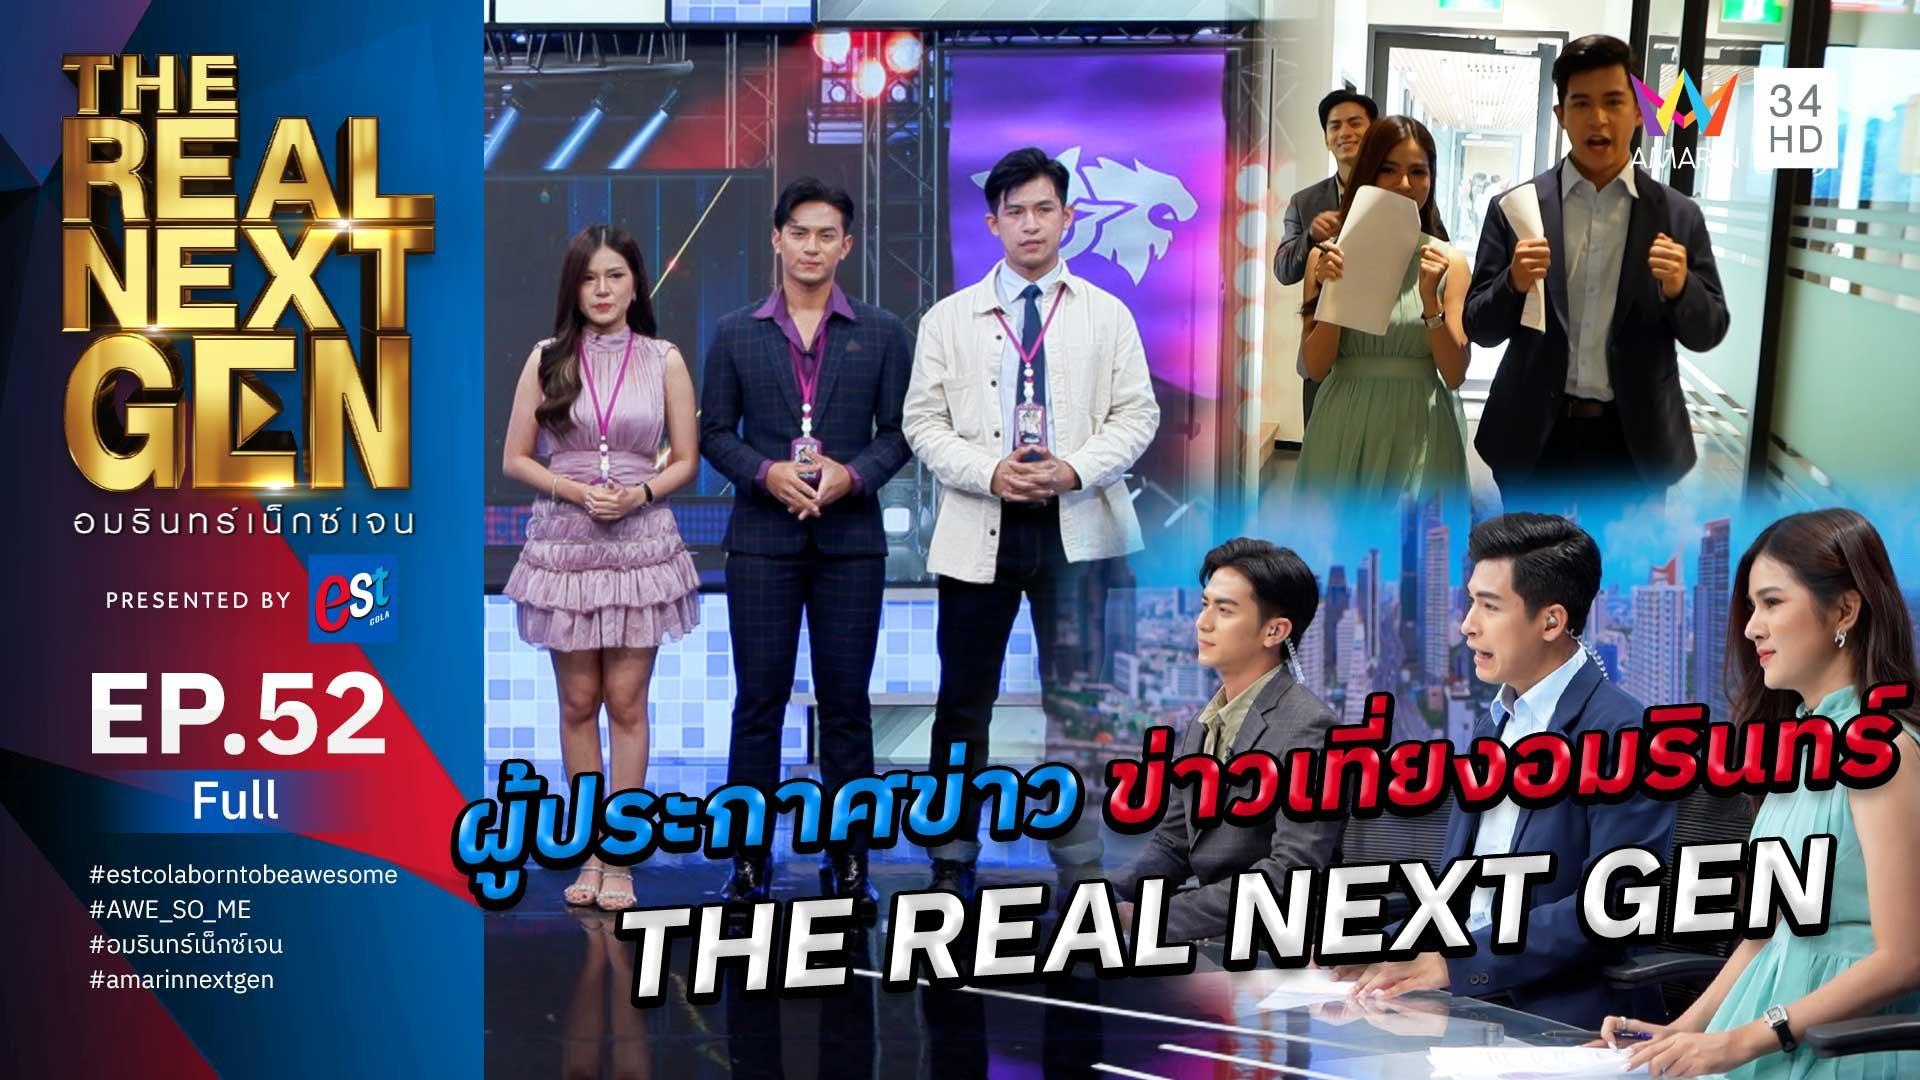 The Real Next Gen อมรินทร์เน็กซ์เจน | EP.52 THE REAL NEXT GEN อมรินทร์เน็กซ์เจน Presented By est cola  | 28 พ.ย. 66 | AMARIN TVHD34